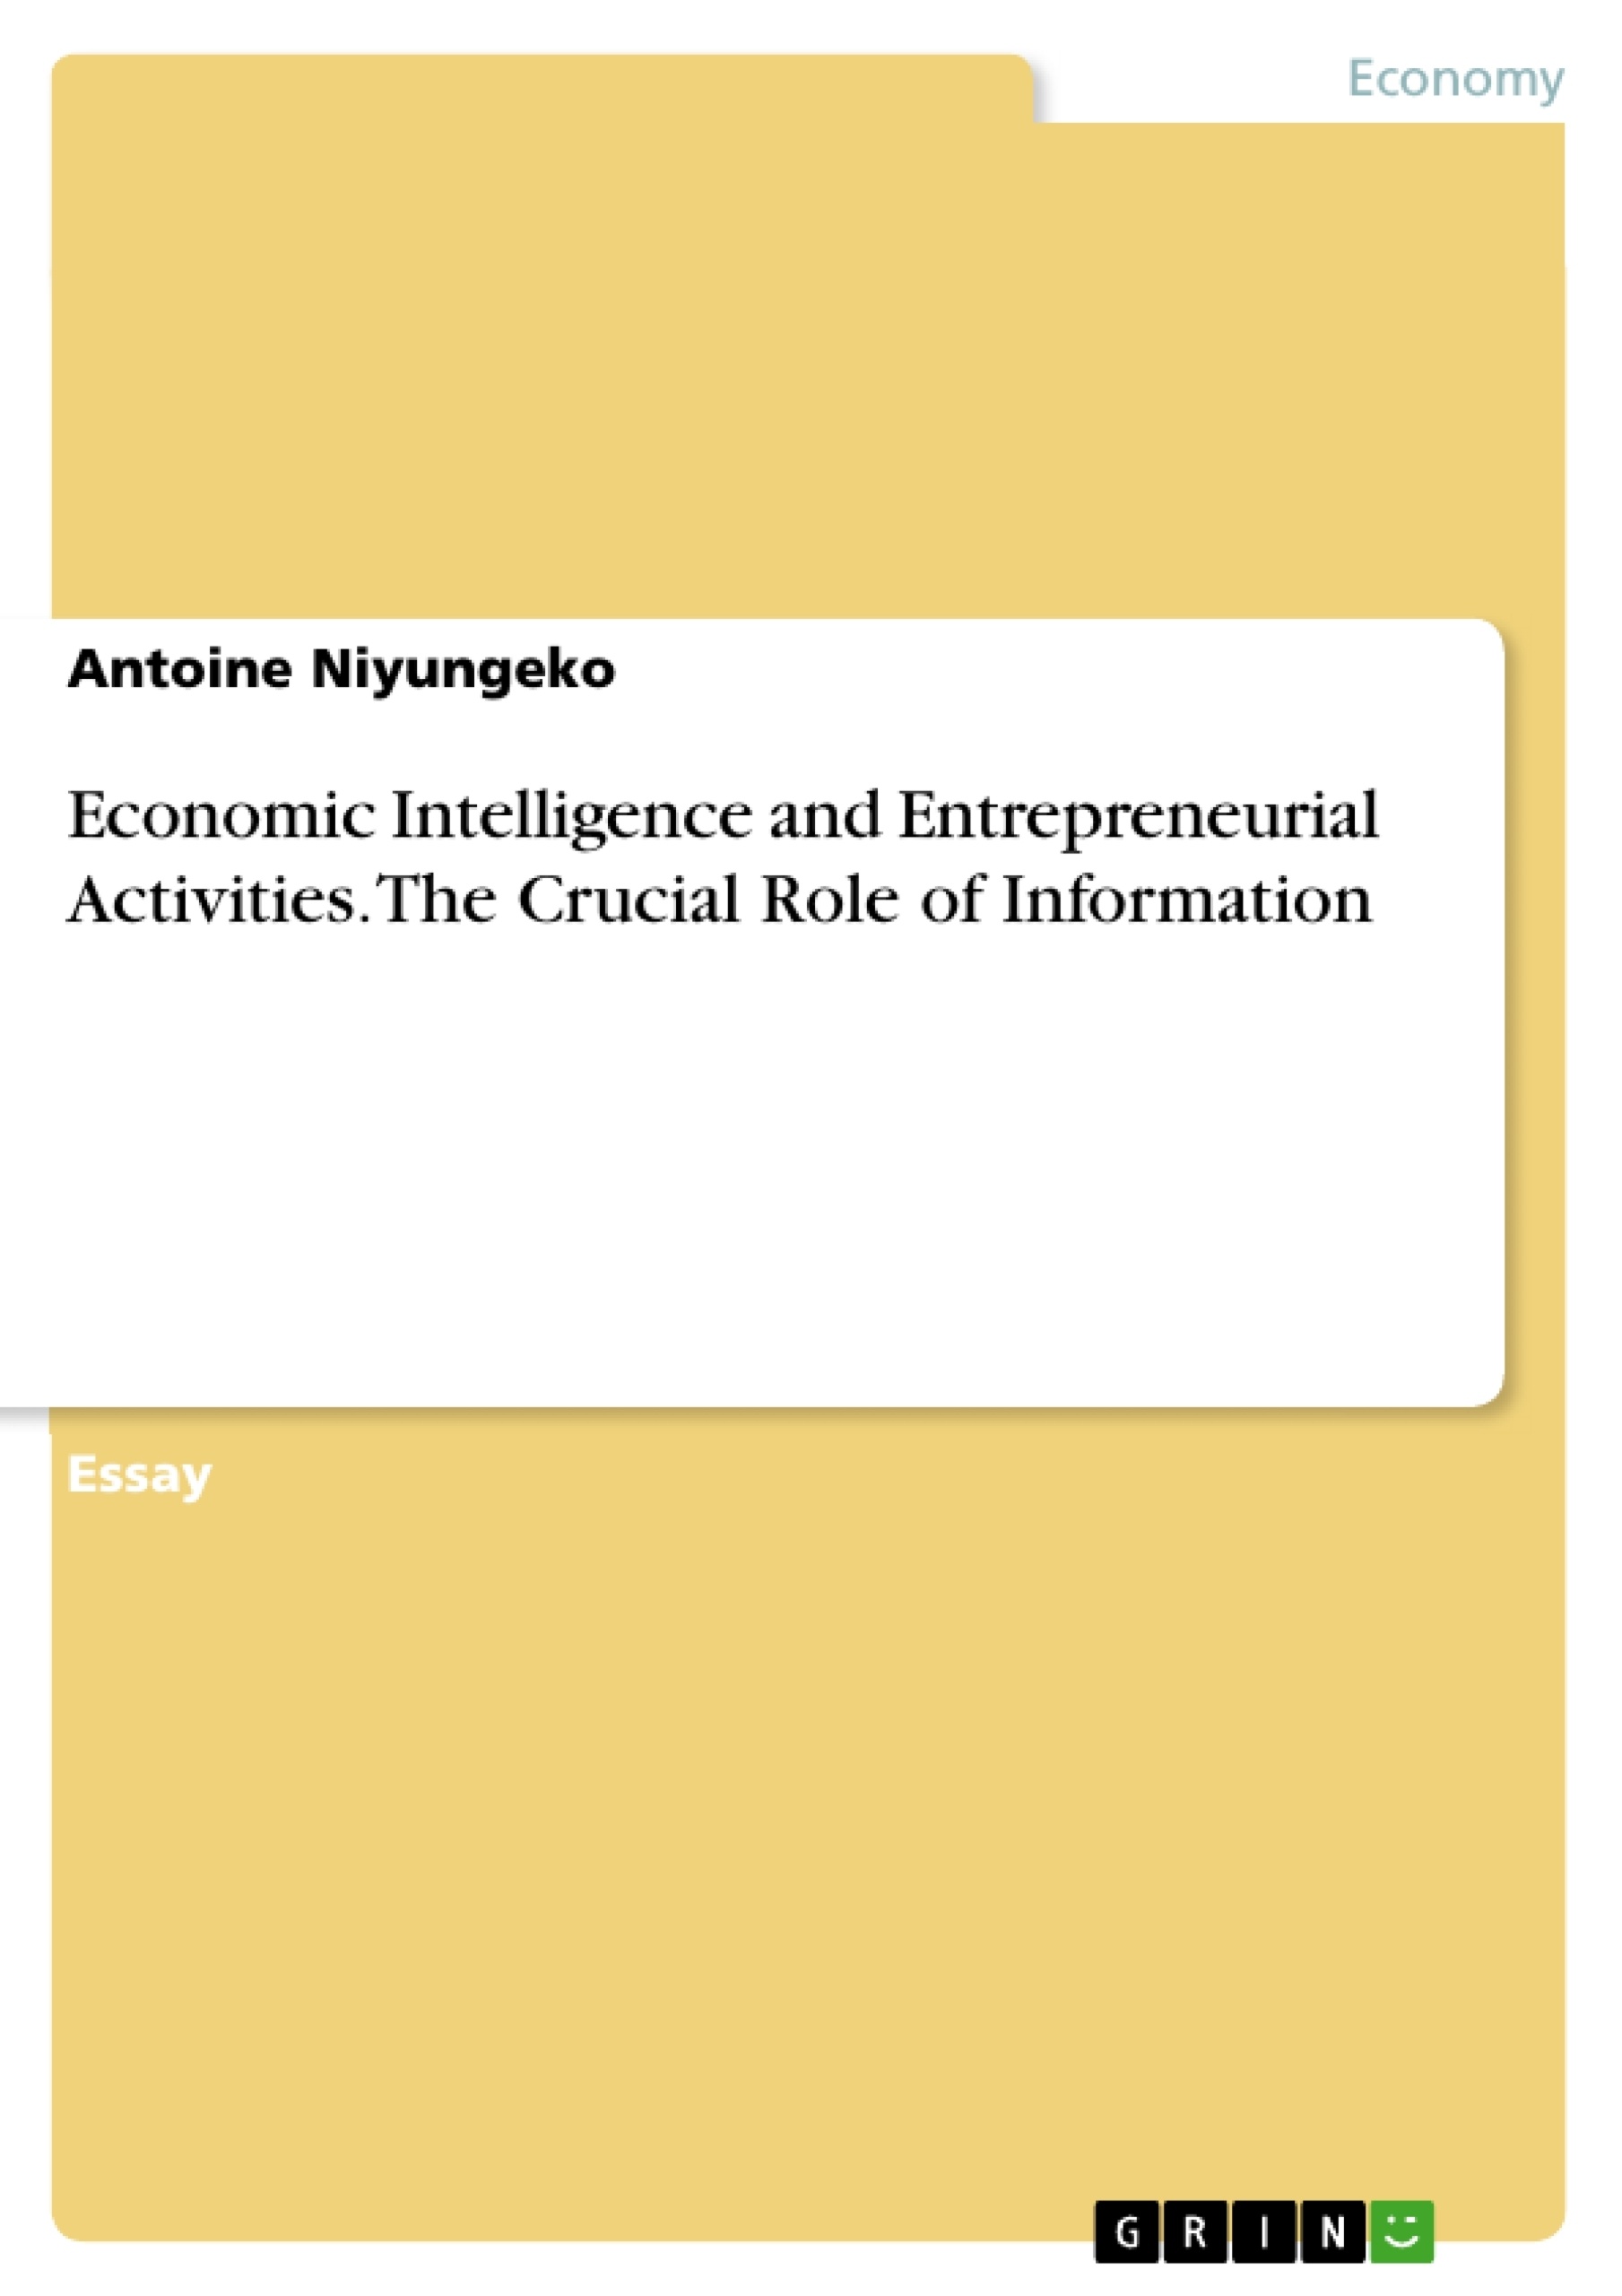 Titel: Economic Intelligence and Entrepreneurial Activities. The Crucial Role of Information